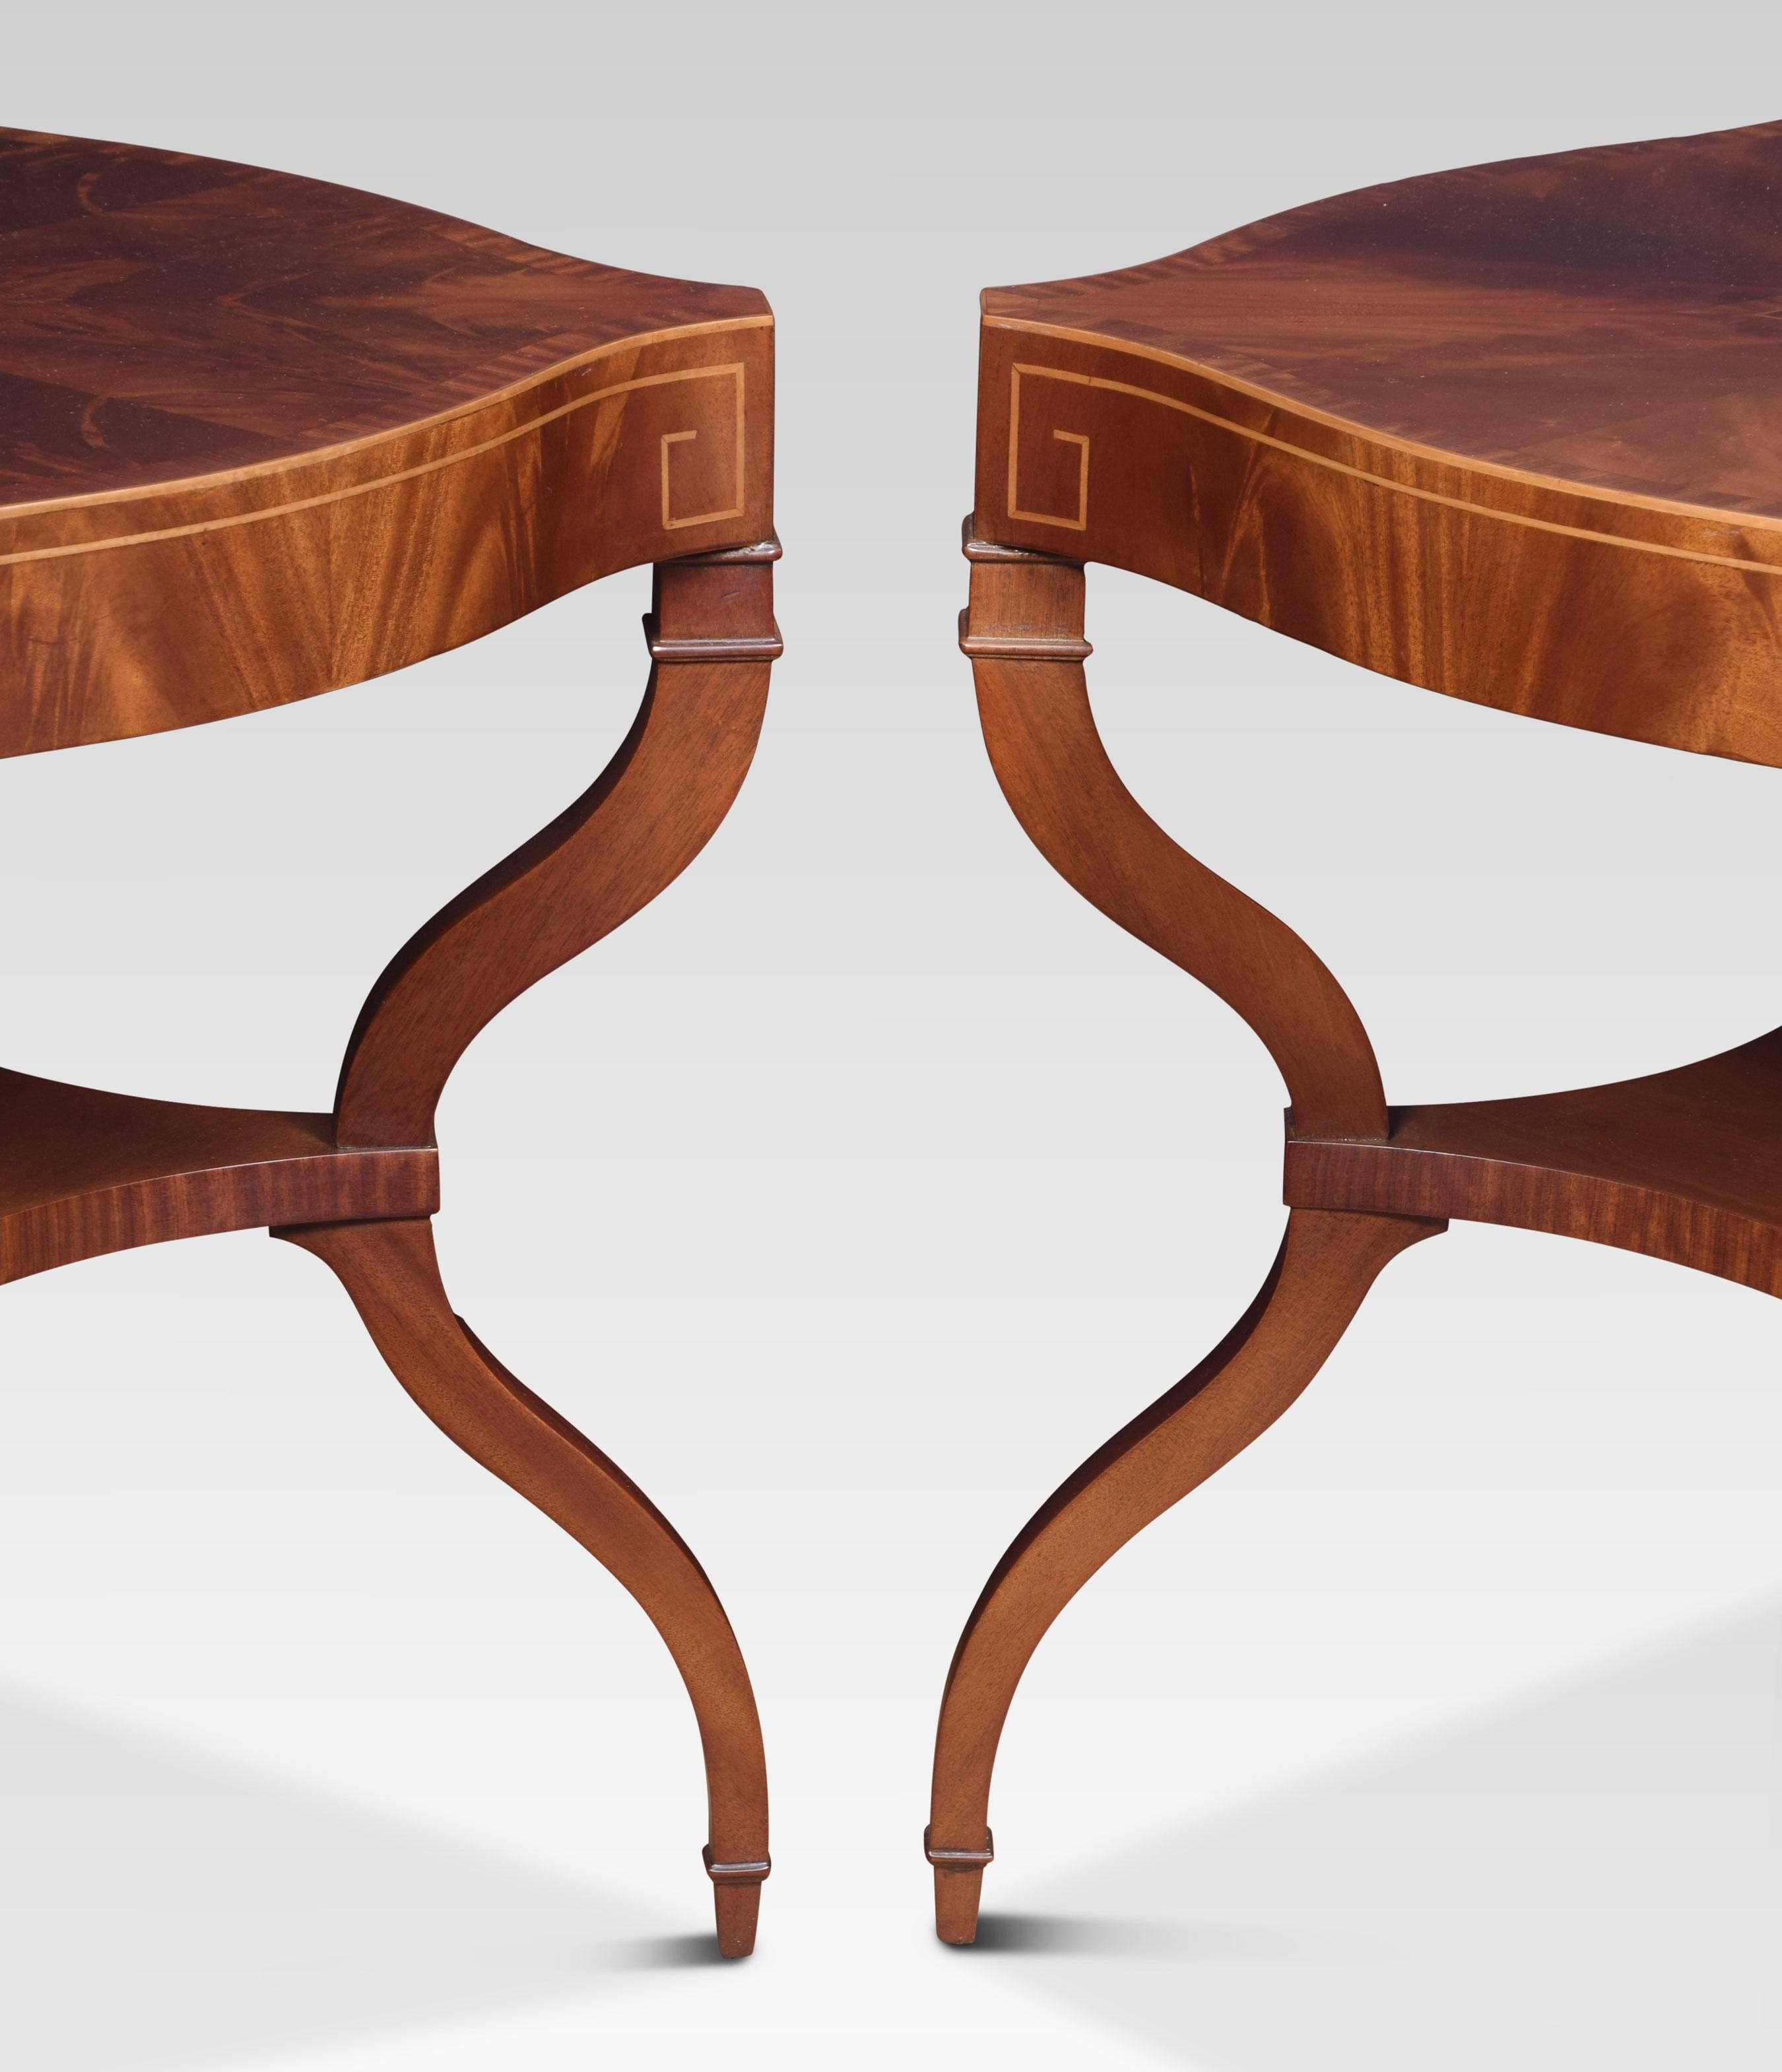 Pair of mahogany lamp tables, the crossbanded flame mahogany quatrefoil tops raised on four inlaid curved legs united by under tier.
Dimensions
Height 27.5 inches
Width 25 inches
Depth 25 inches.